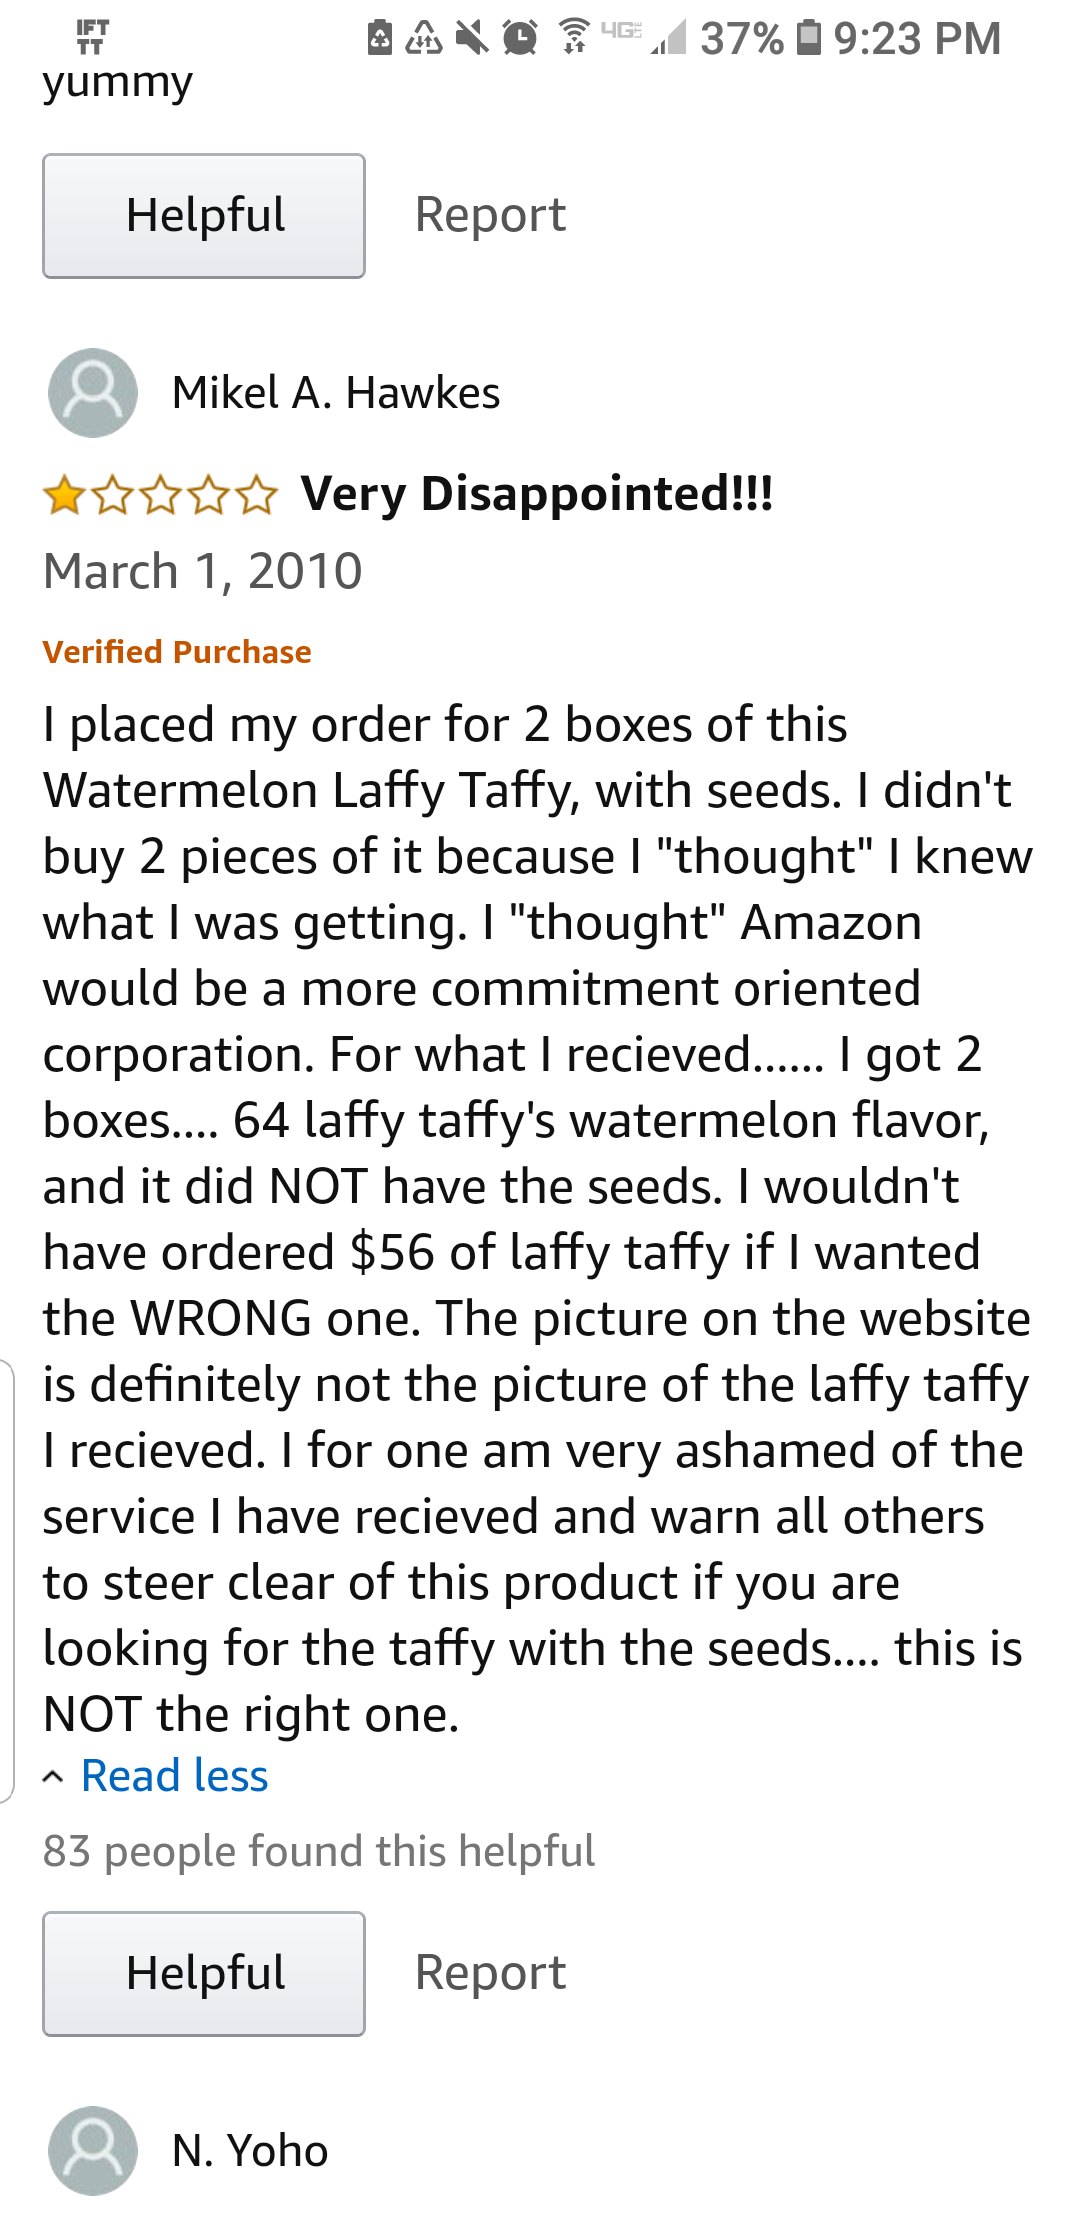 amazon reviews - @ 4637% yummy Helpful Report Mikel A. Hawkes Very Disappointed!!! Verified Purchase I placed my order for 2 boxes of this Watermelon Laffy Taffy, with seeds. I didn't buy 2 pieces of it because I "thought" I knew what I was getting. I "th